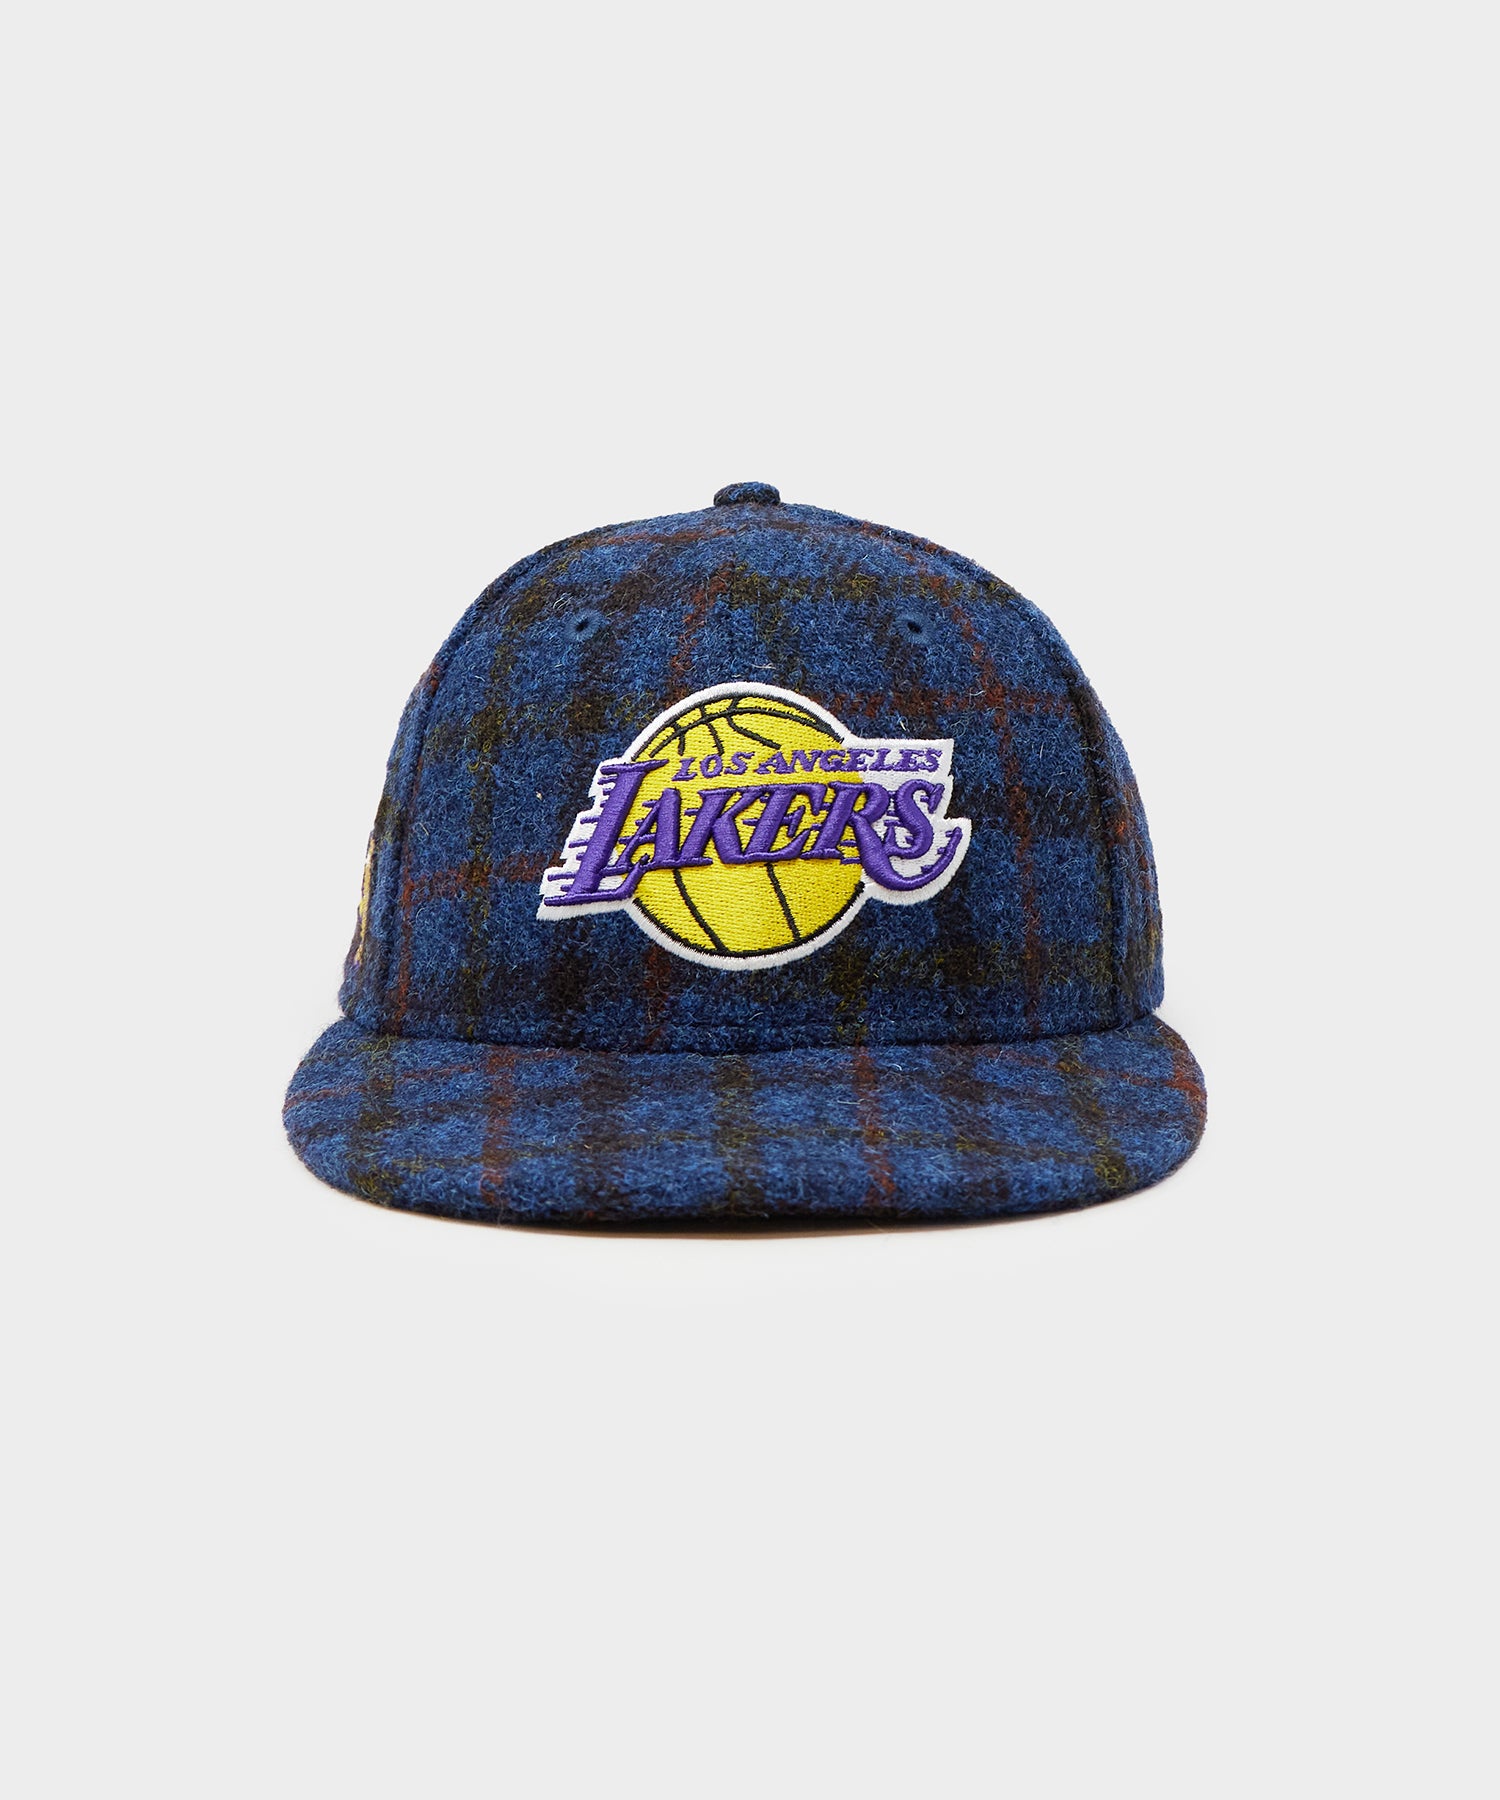 Todd Snyder x NBA Courtside Collection Release Date, Prices, Where